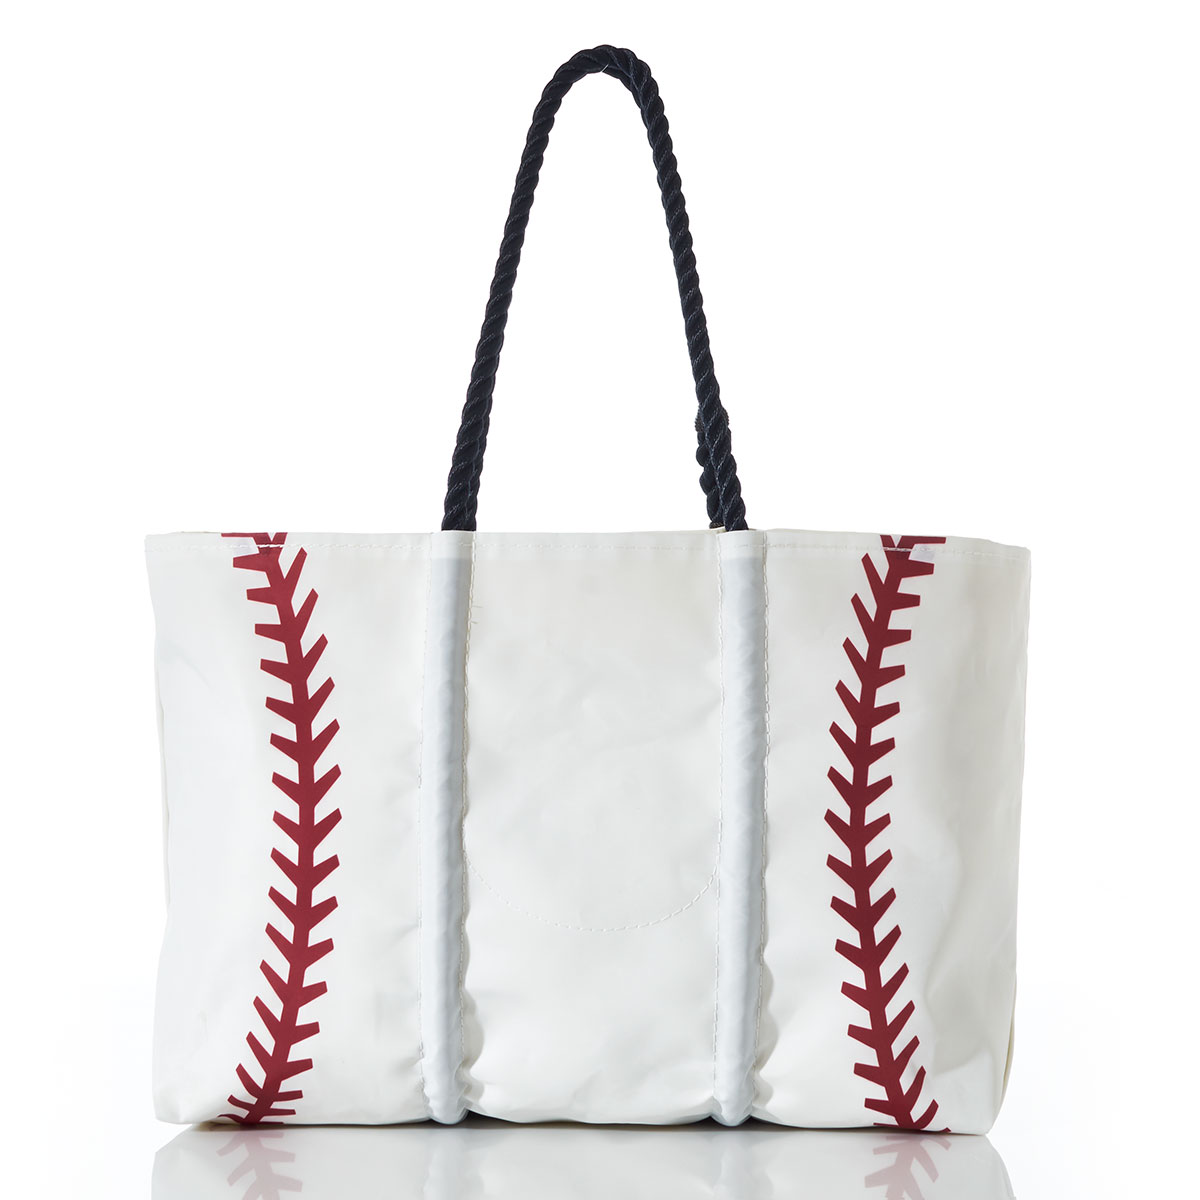 classic baseball design with red stitching on the sides of a white recycled sail cloth tote and navy rope handles